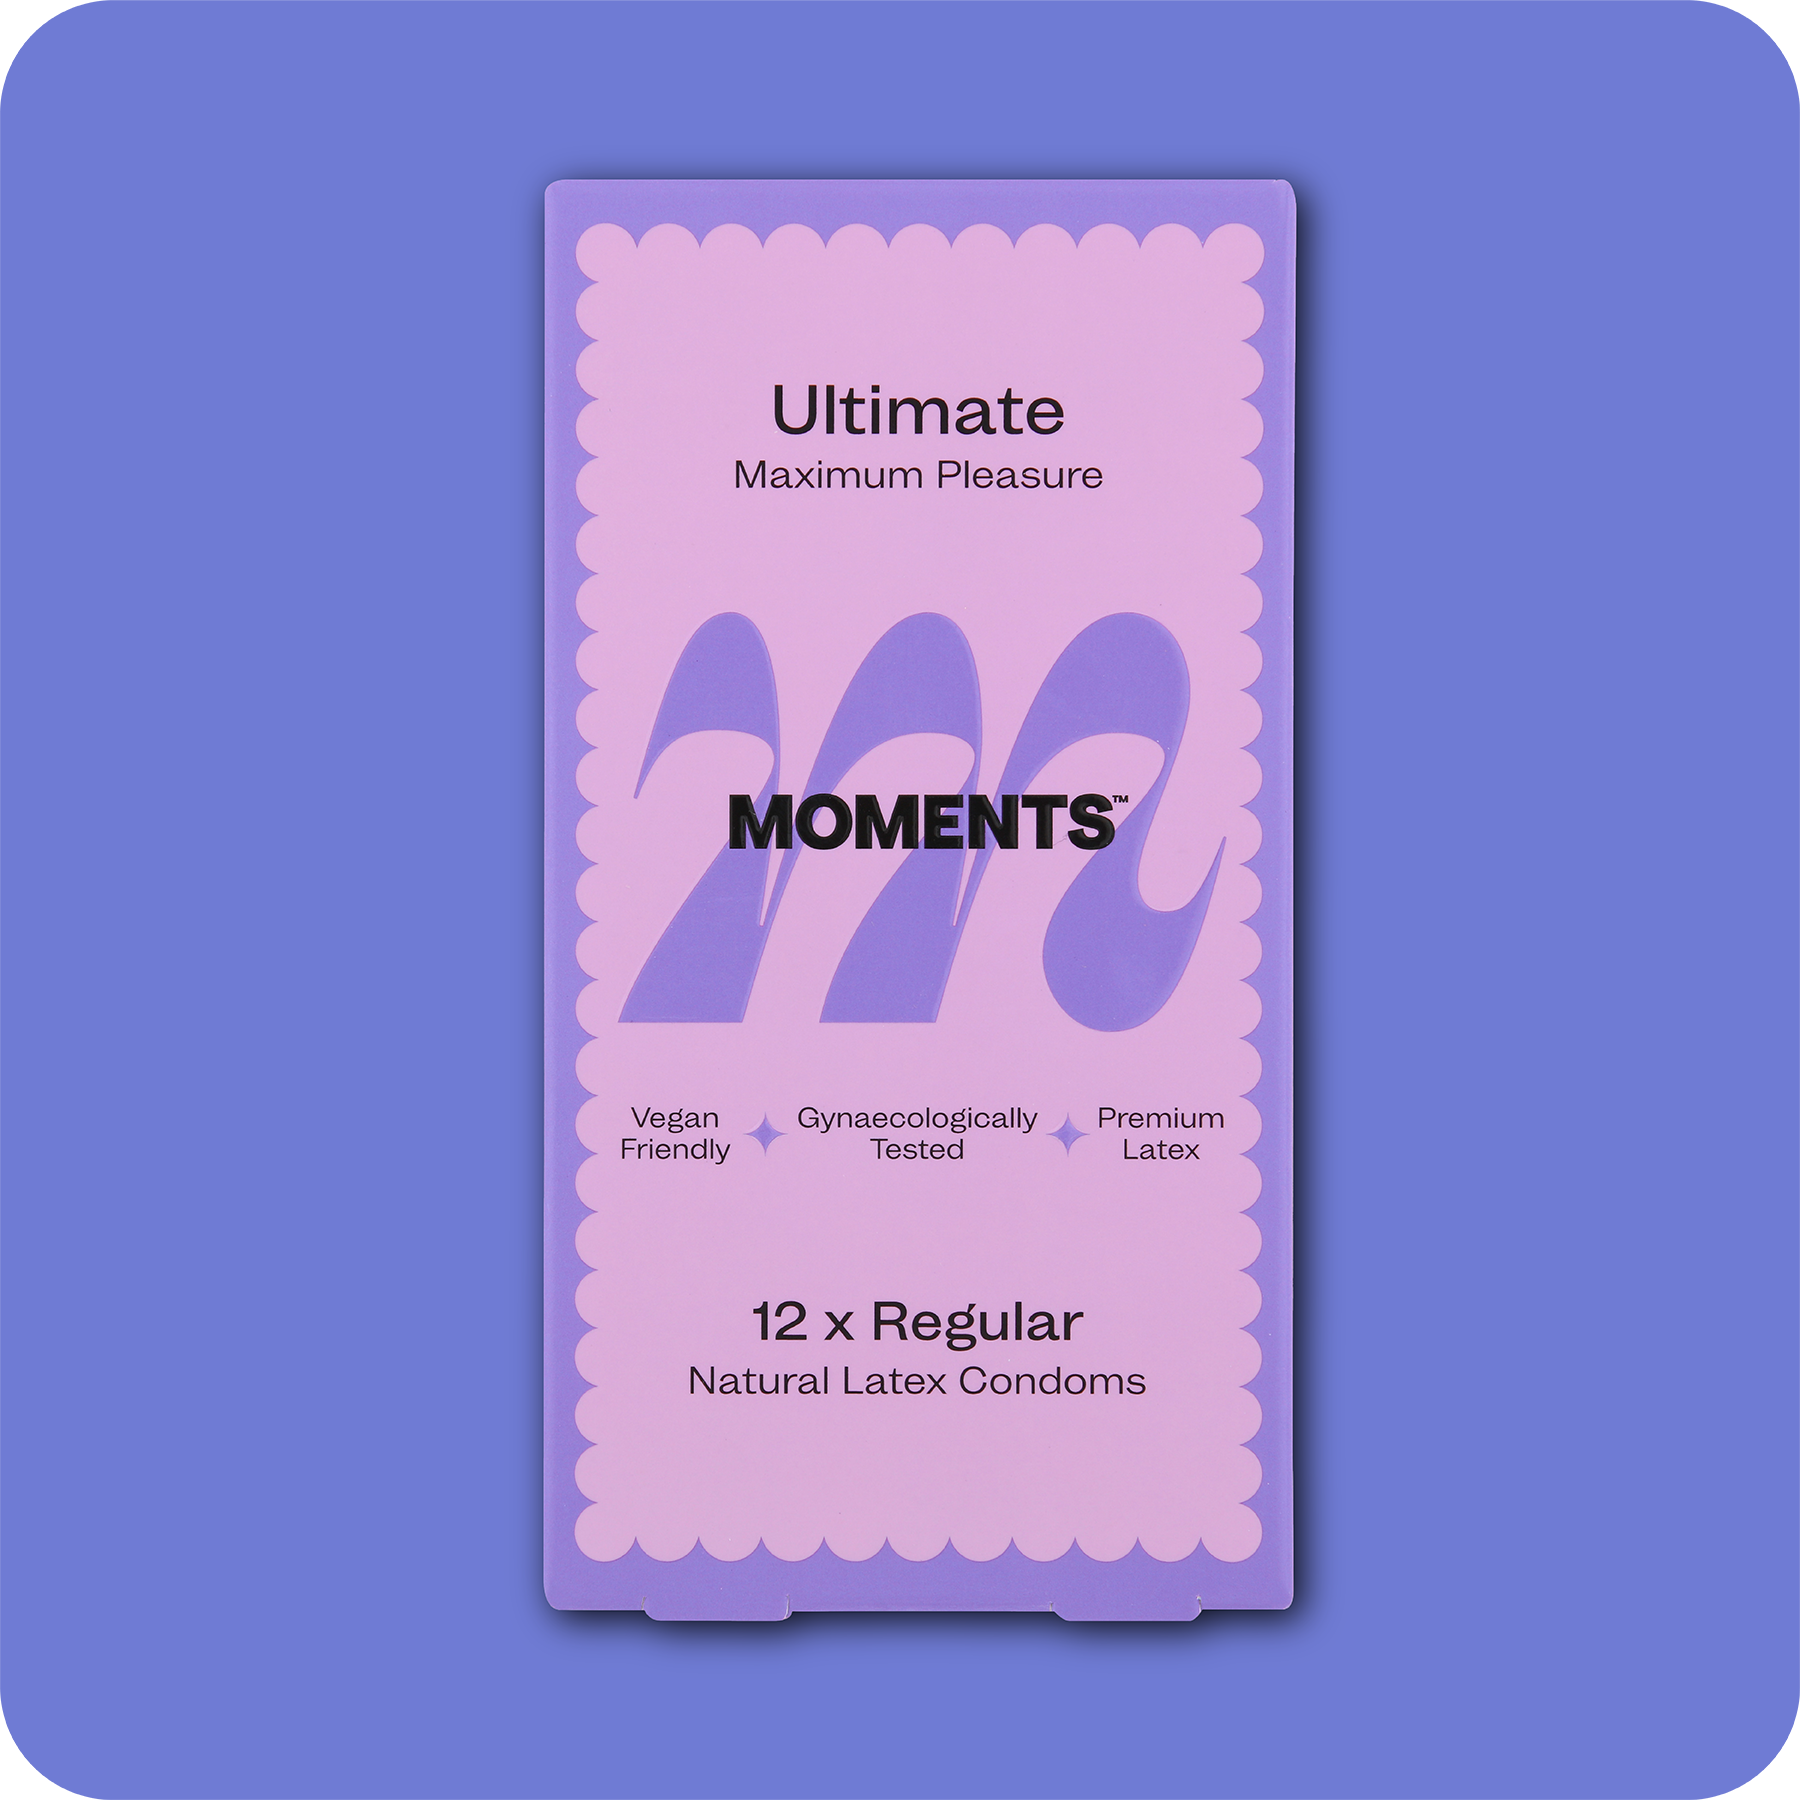 Close-up view of Moments Ultimate condom with its distinctive purple packaging